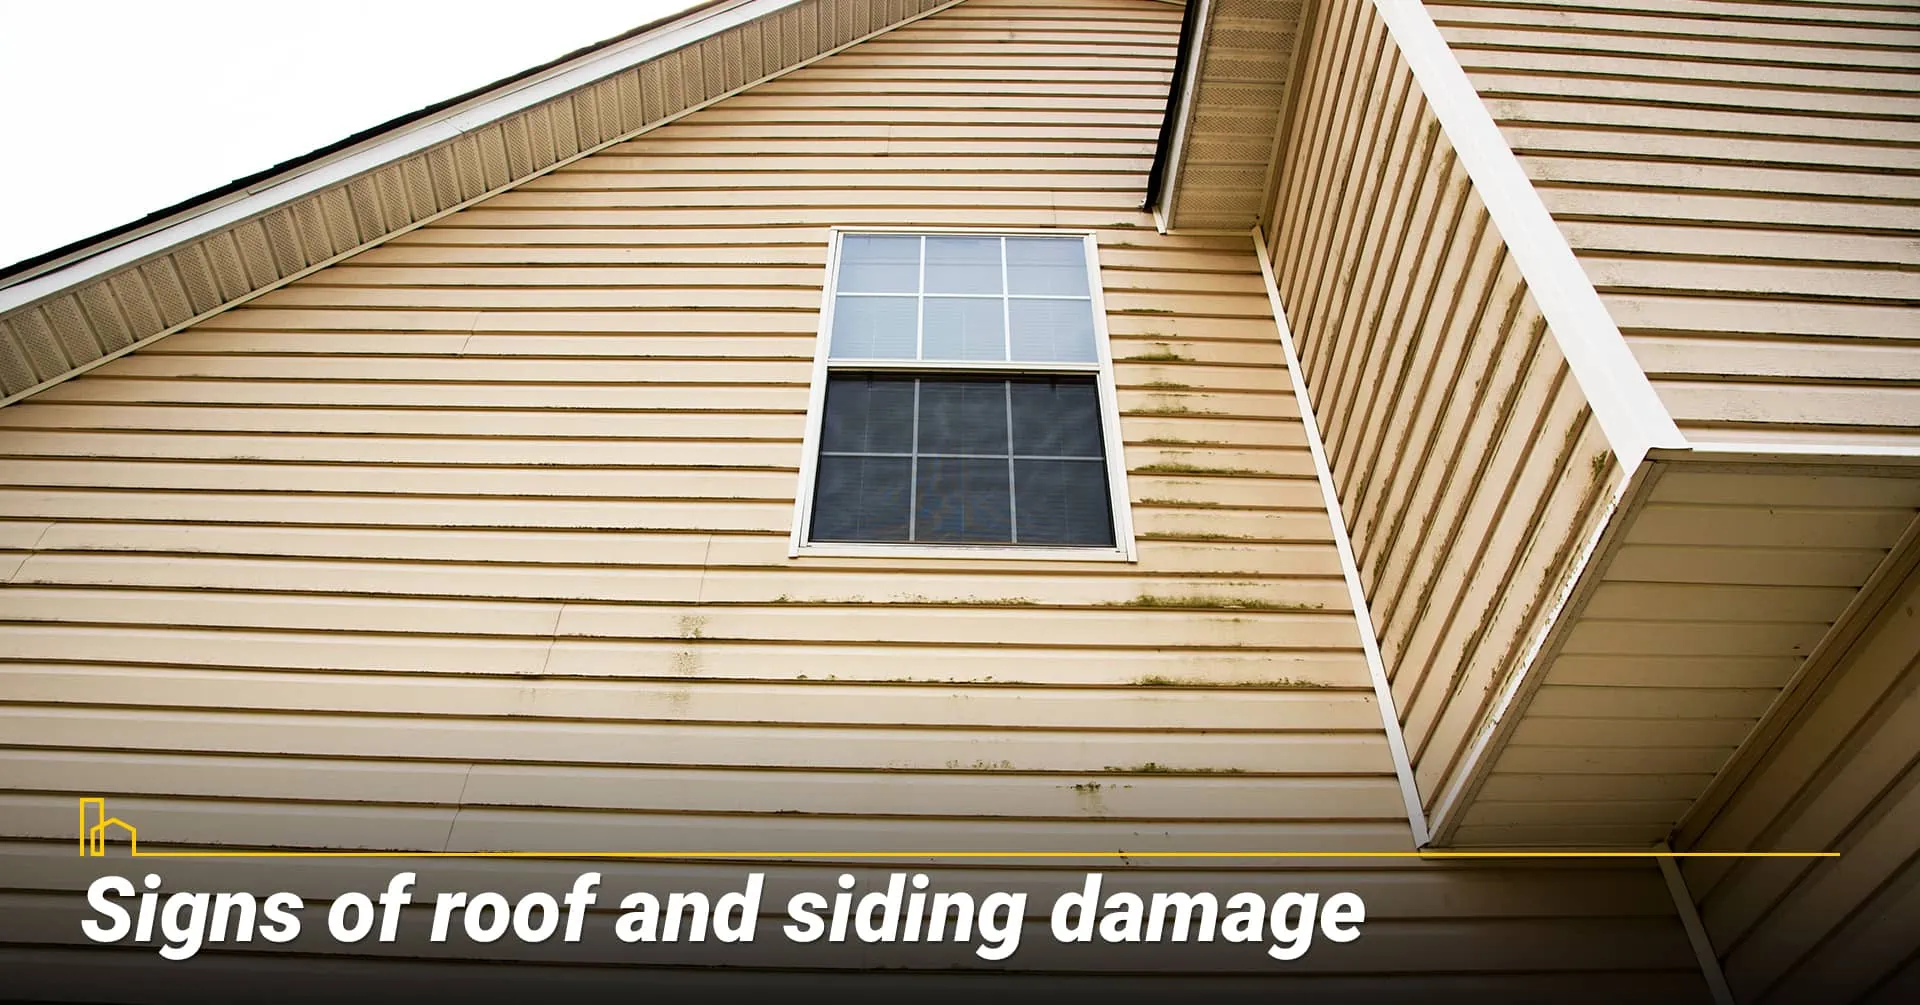 II. Signs of roof and siding damage